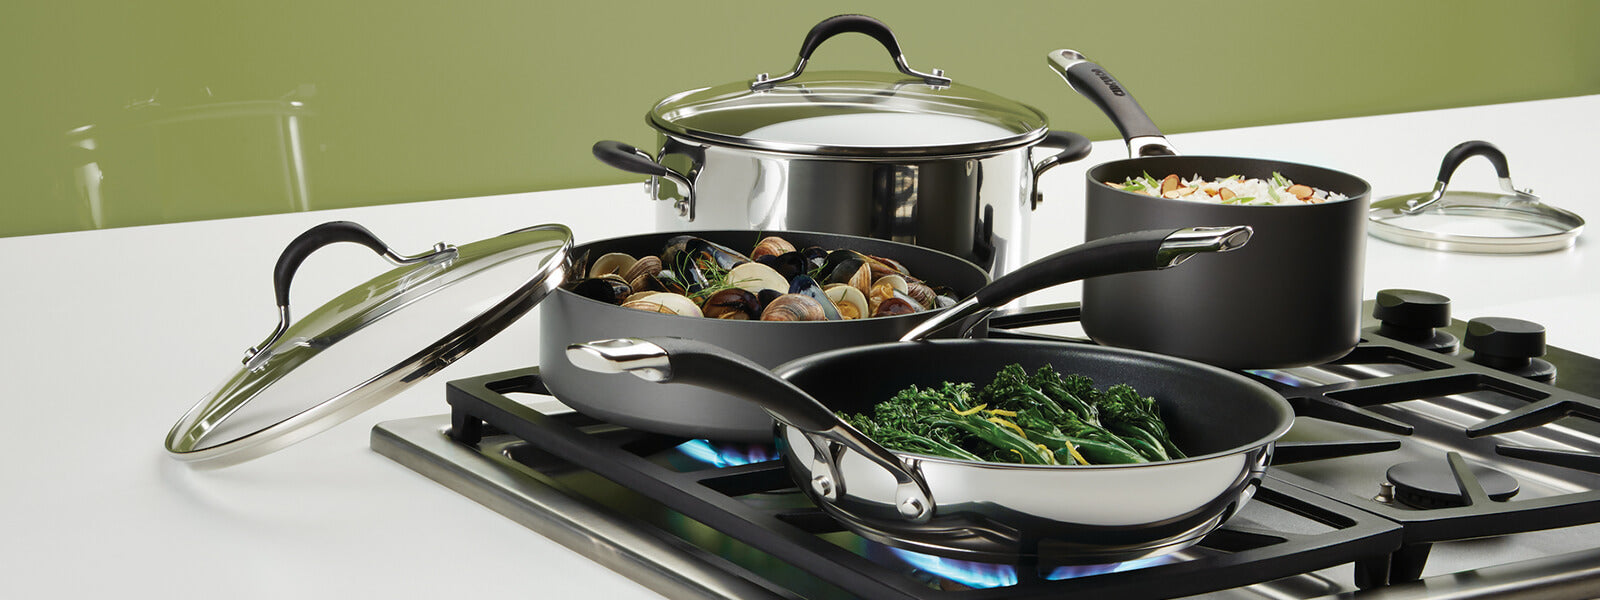 Top 5 cookware brands in India that you can trust